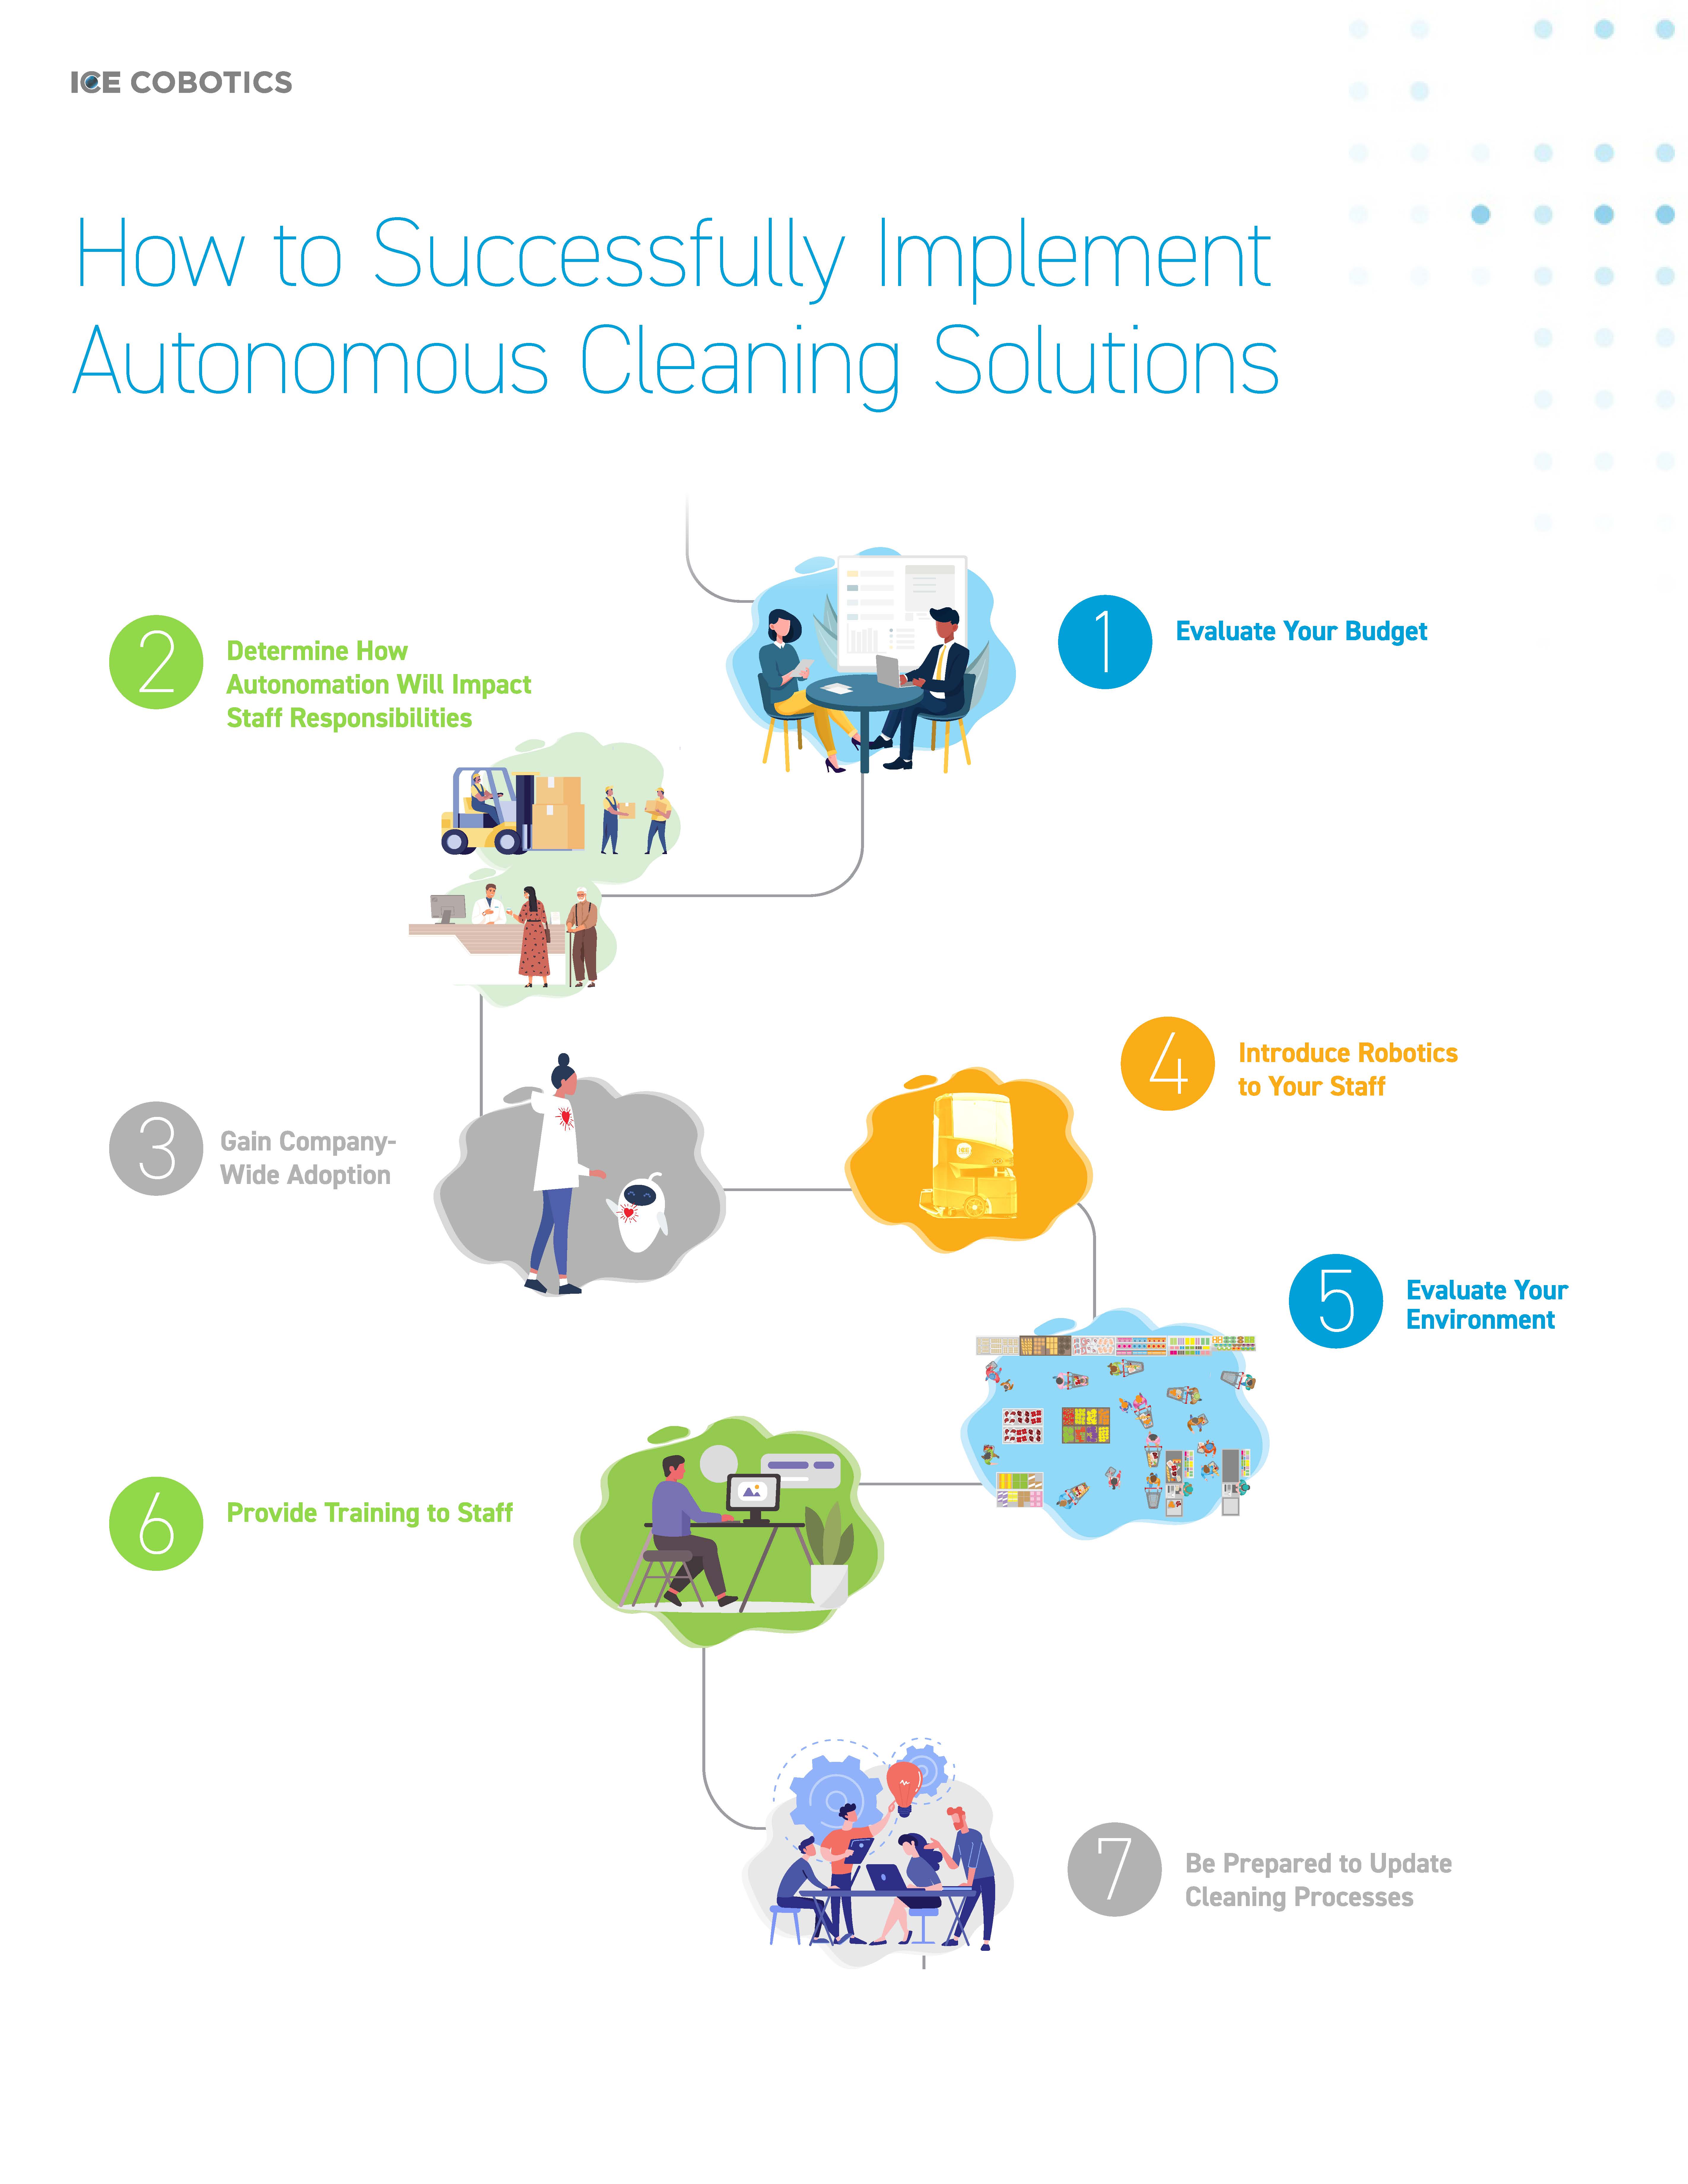 How to Successfully Implement Autonomous Cleaning Solutions